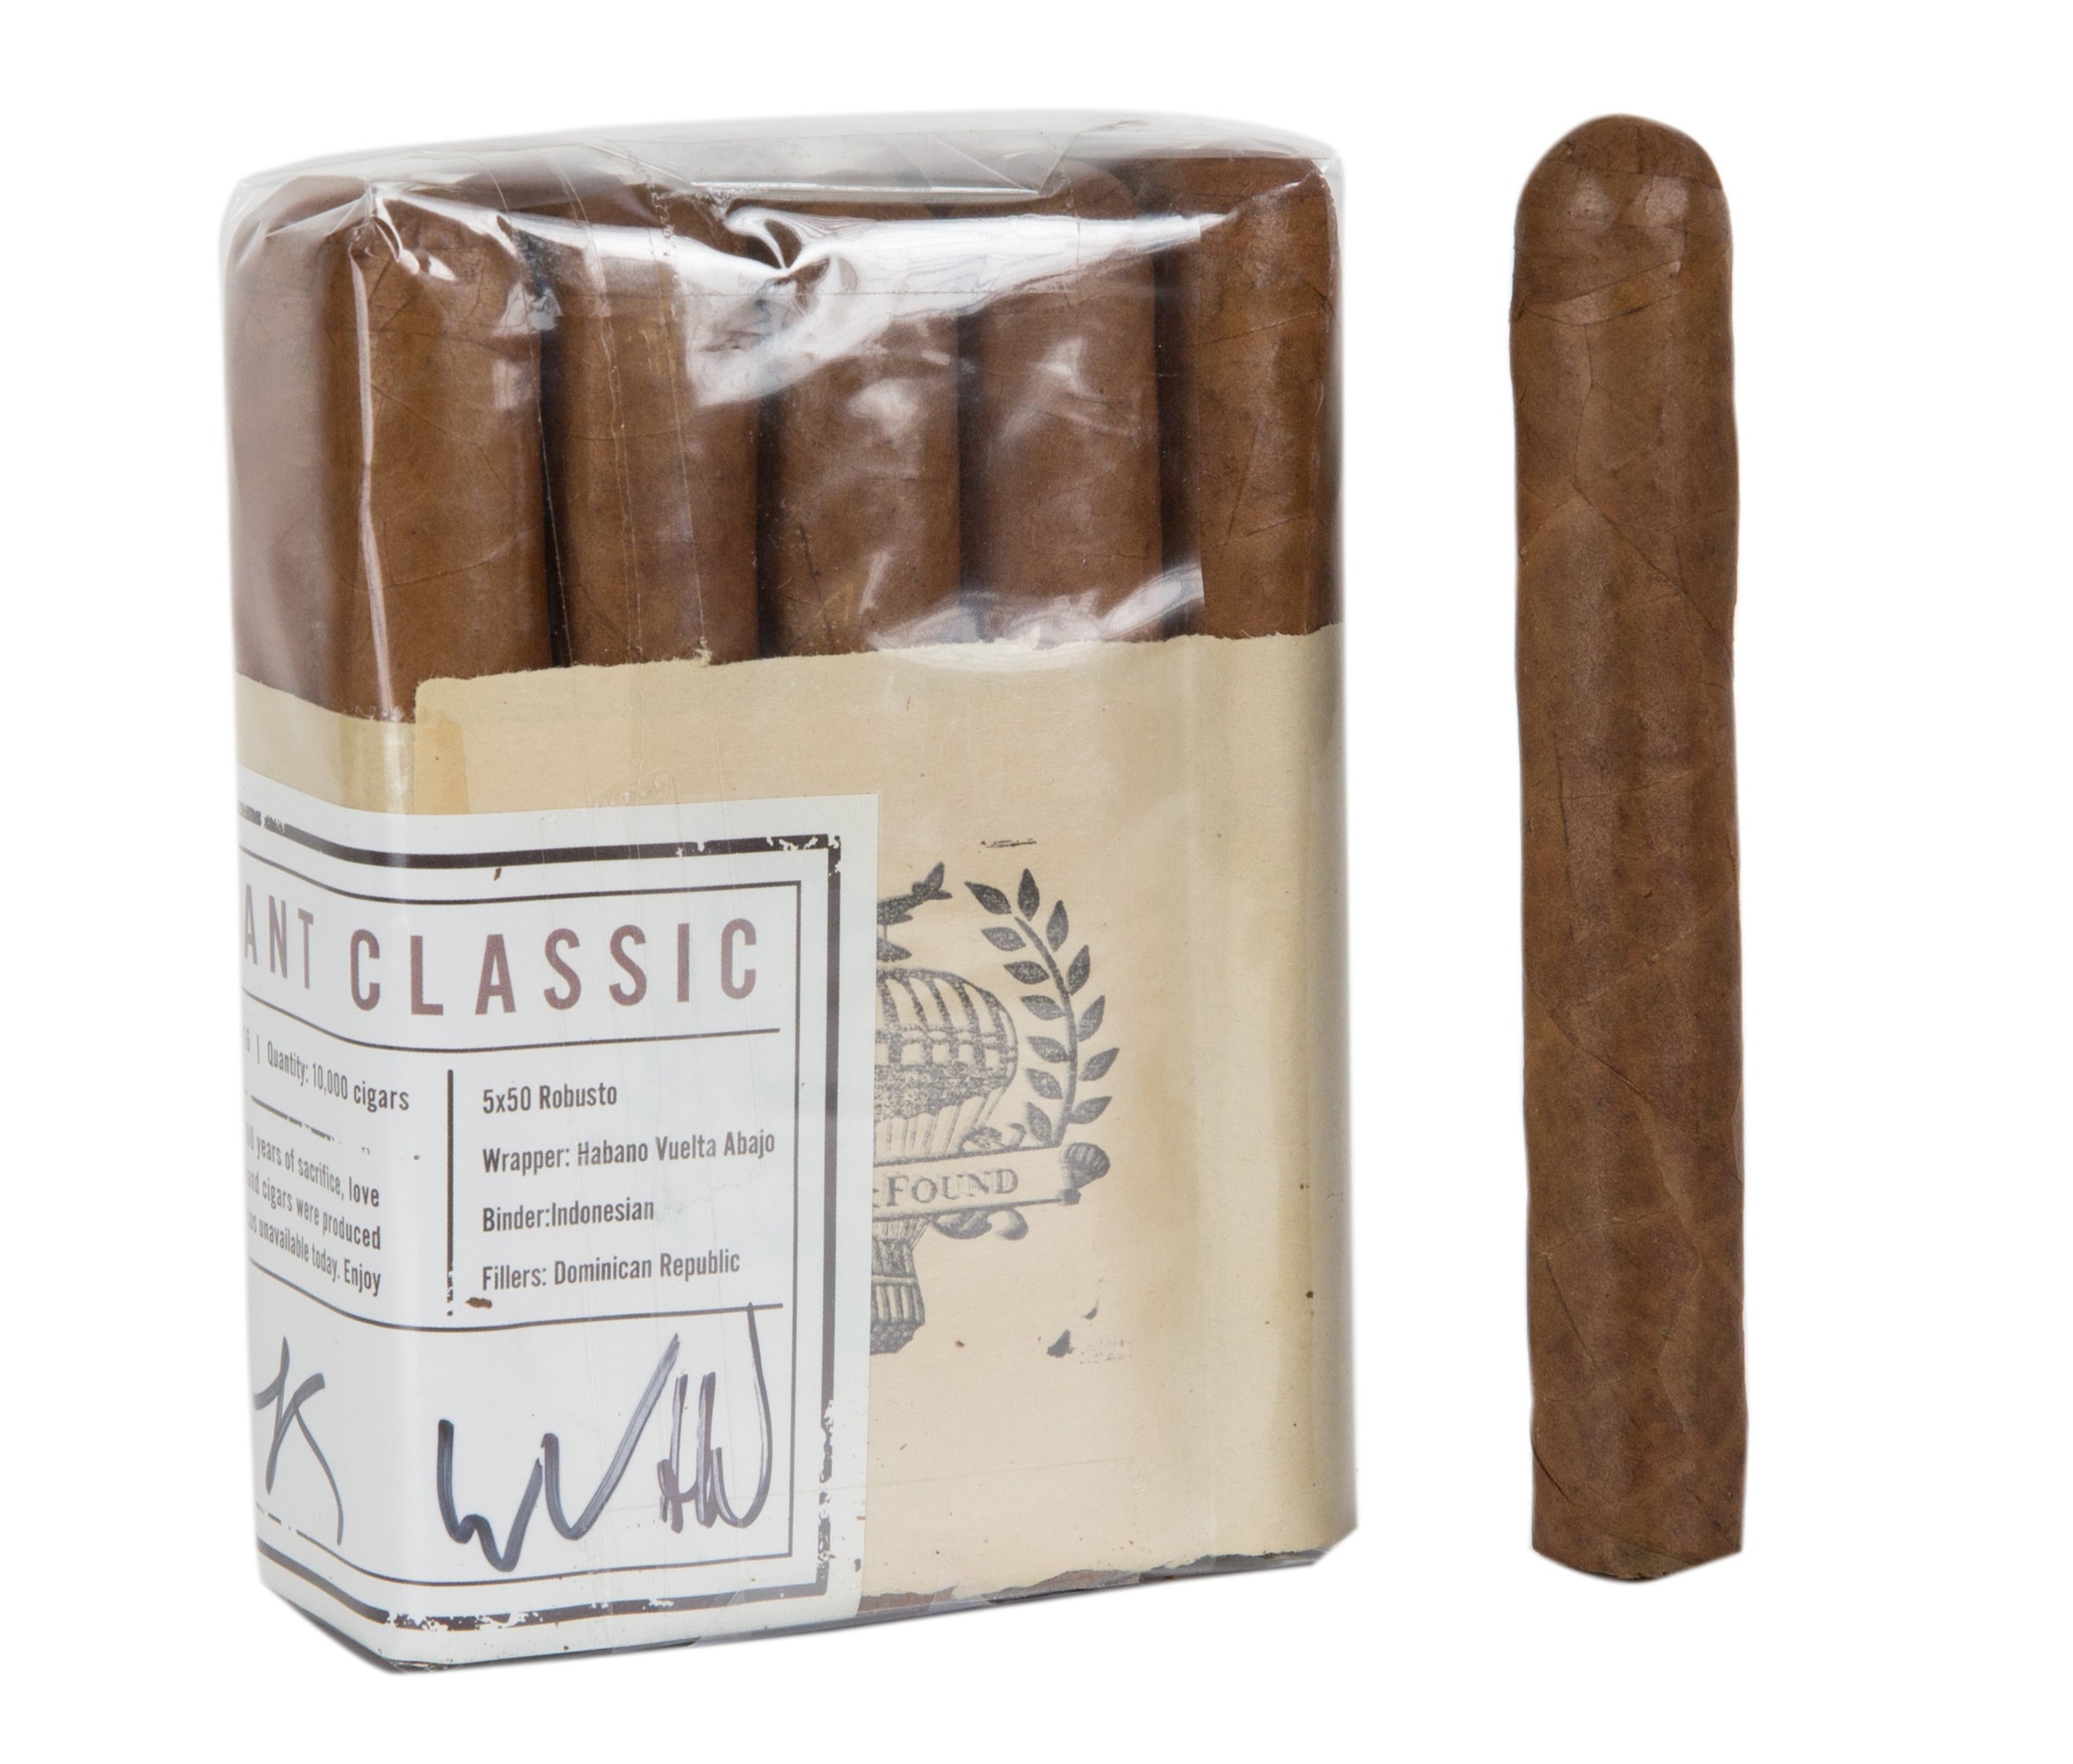 Lost & Found Instant Classic 2016 Robusto 10er Bundle